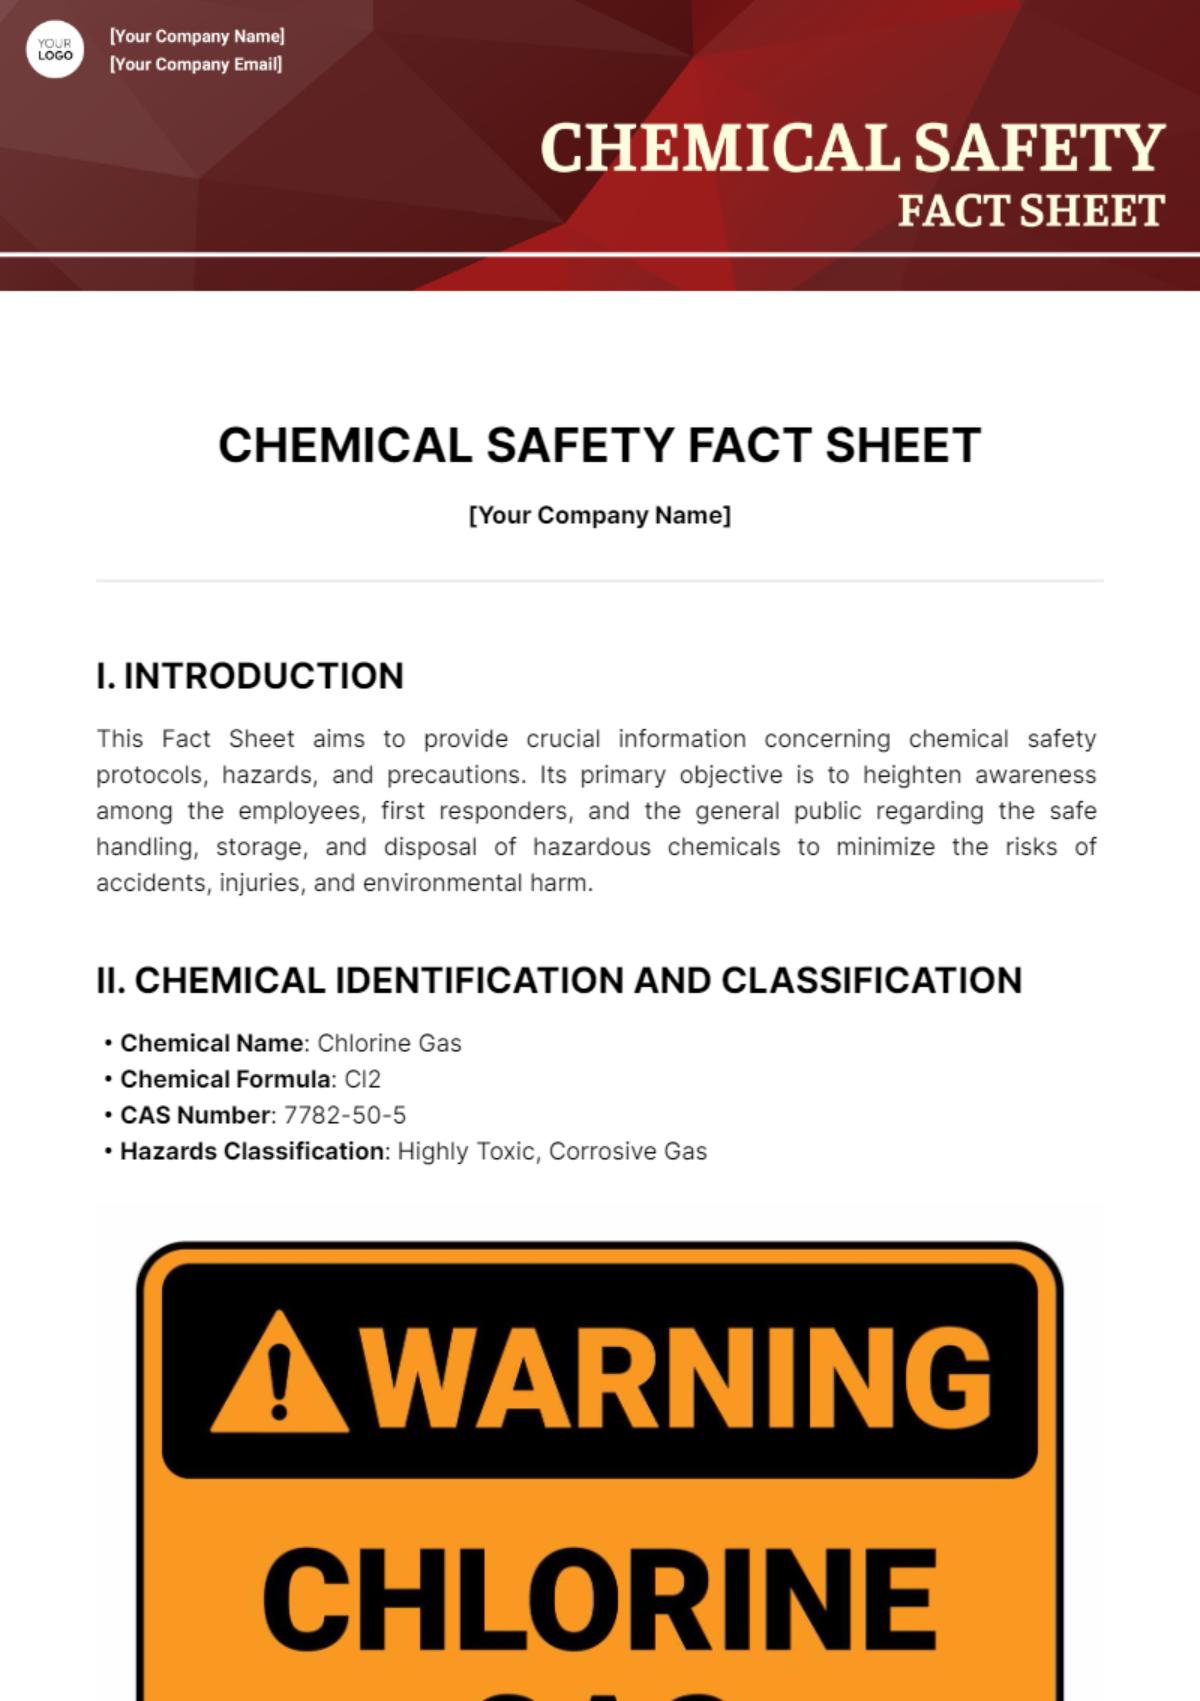 Chemical Safety Fact Sheet Template